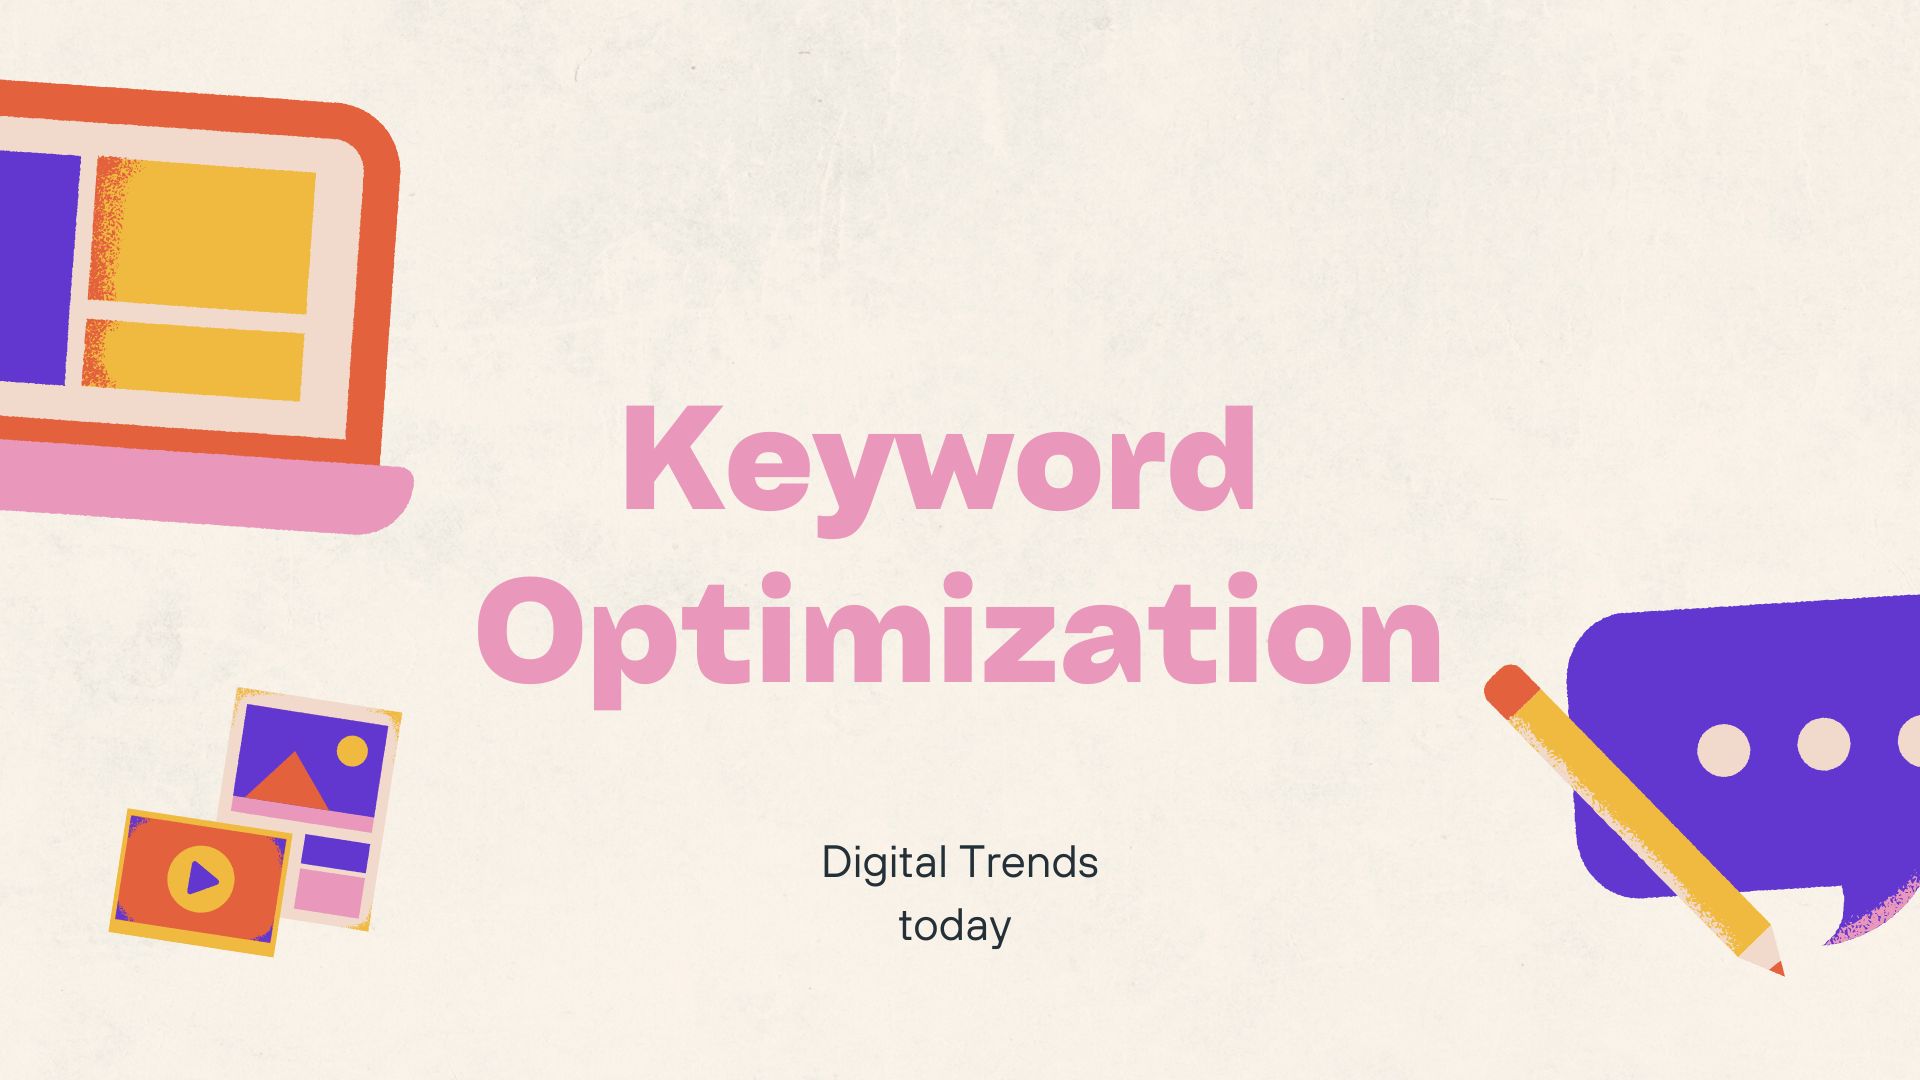 Keyword optimization written in cream colour while digital trends today written in black colour